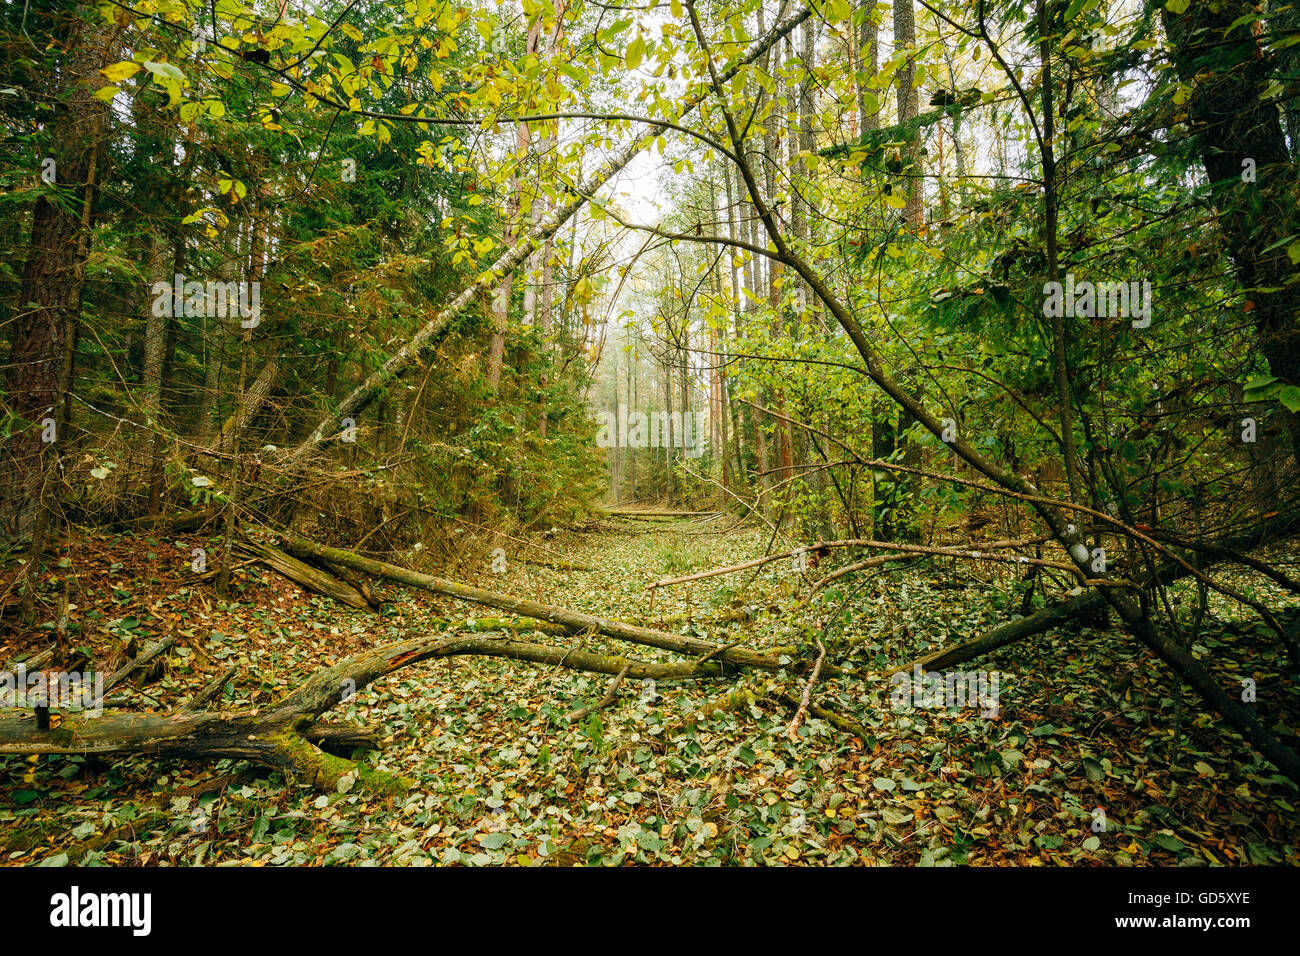 Fallen Trees In Wild Autumn Forest Reserve. Stock Photo